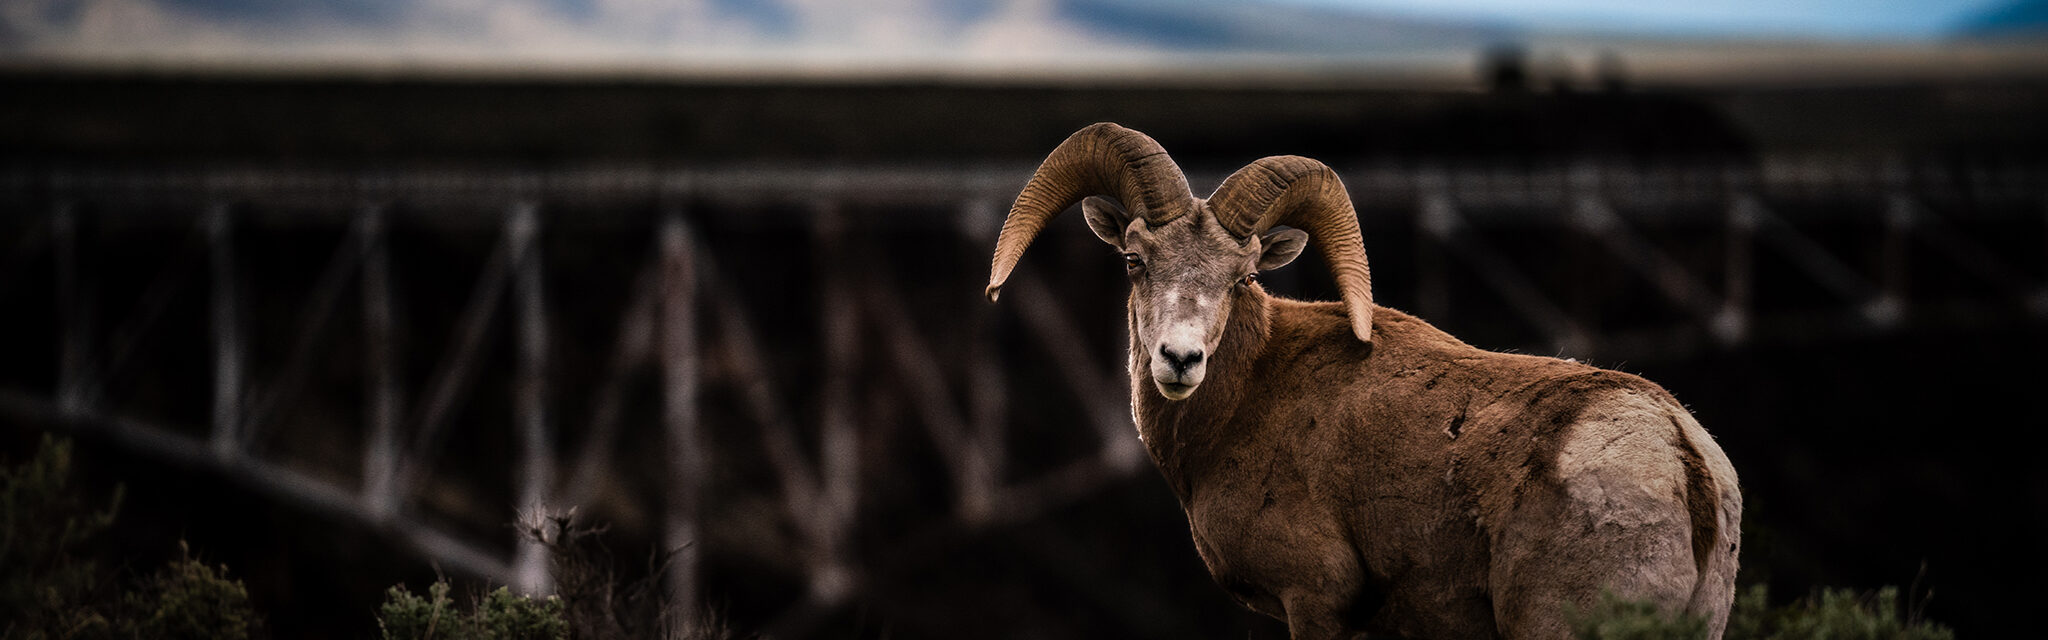 A Rocky Mountain Bighorn Sheep looks over his shoulder at the camera with the Rio Grande Gorge Bridge behind him.